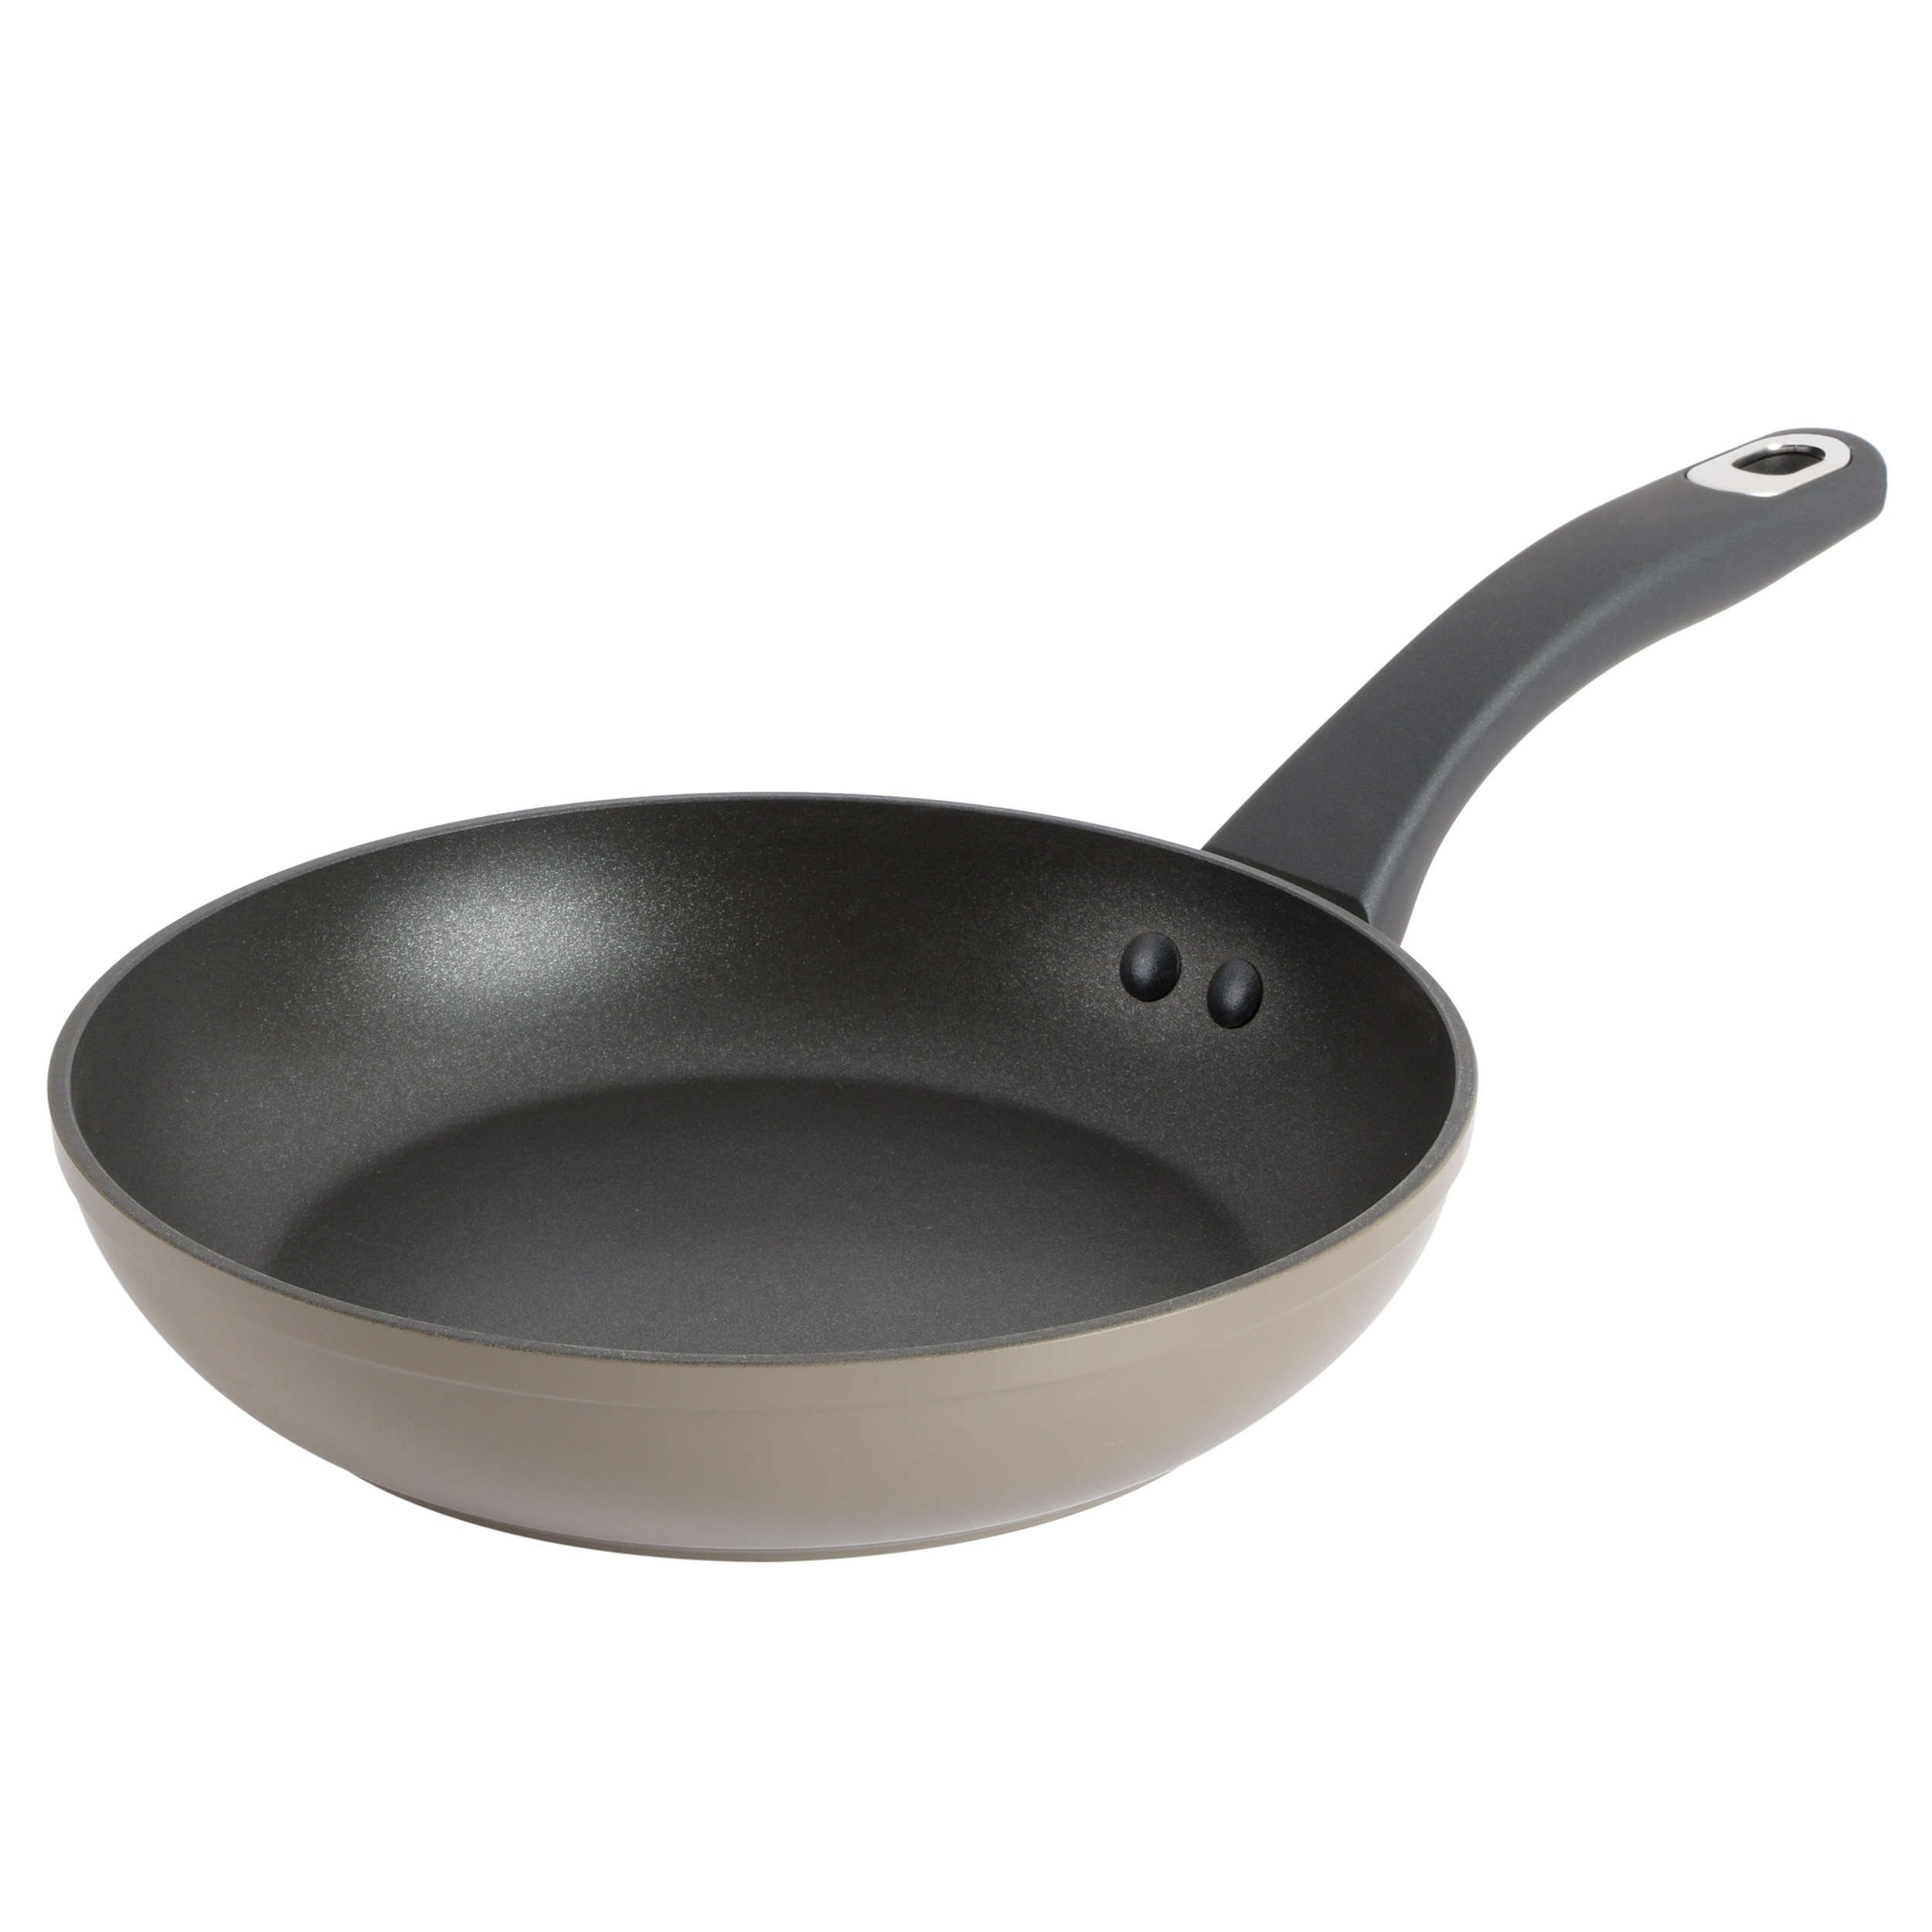 https://ak1.ostkcdn.com/images/products/is/images/direct/1d78df93b7c1363669500ff1a2afa5bf5280235f/Martha-Stewart-Everyday-Bowcroft-Aluminum-Nonstick-Frying-Pan.jpg